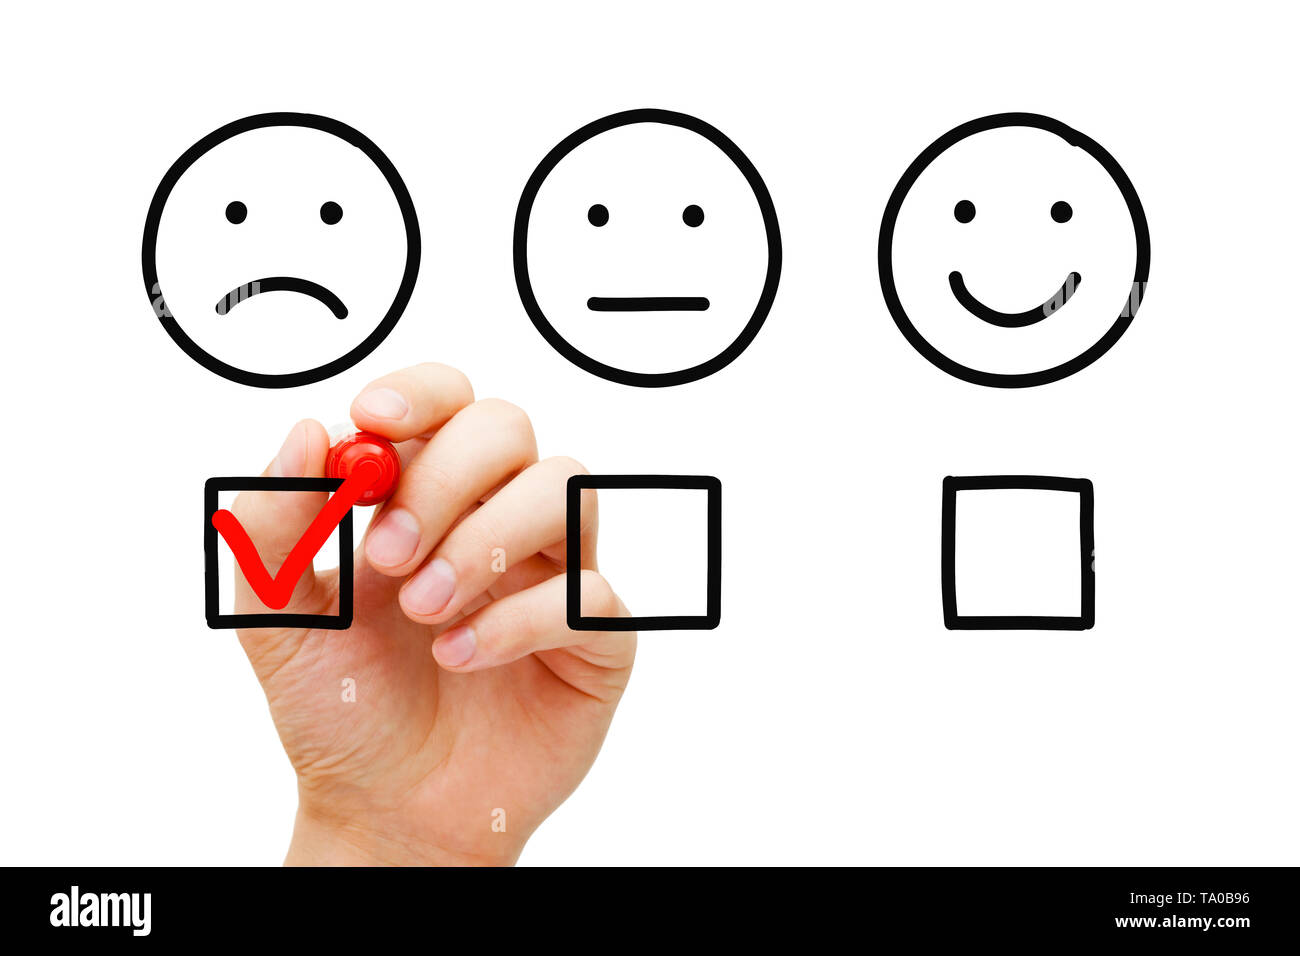 Disappointed client leaving negative evaluation with red marker check mark on customer feedback survey. Unhappy drawn face concept. Stock Photo